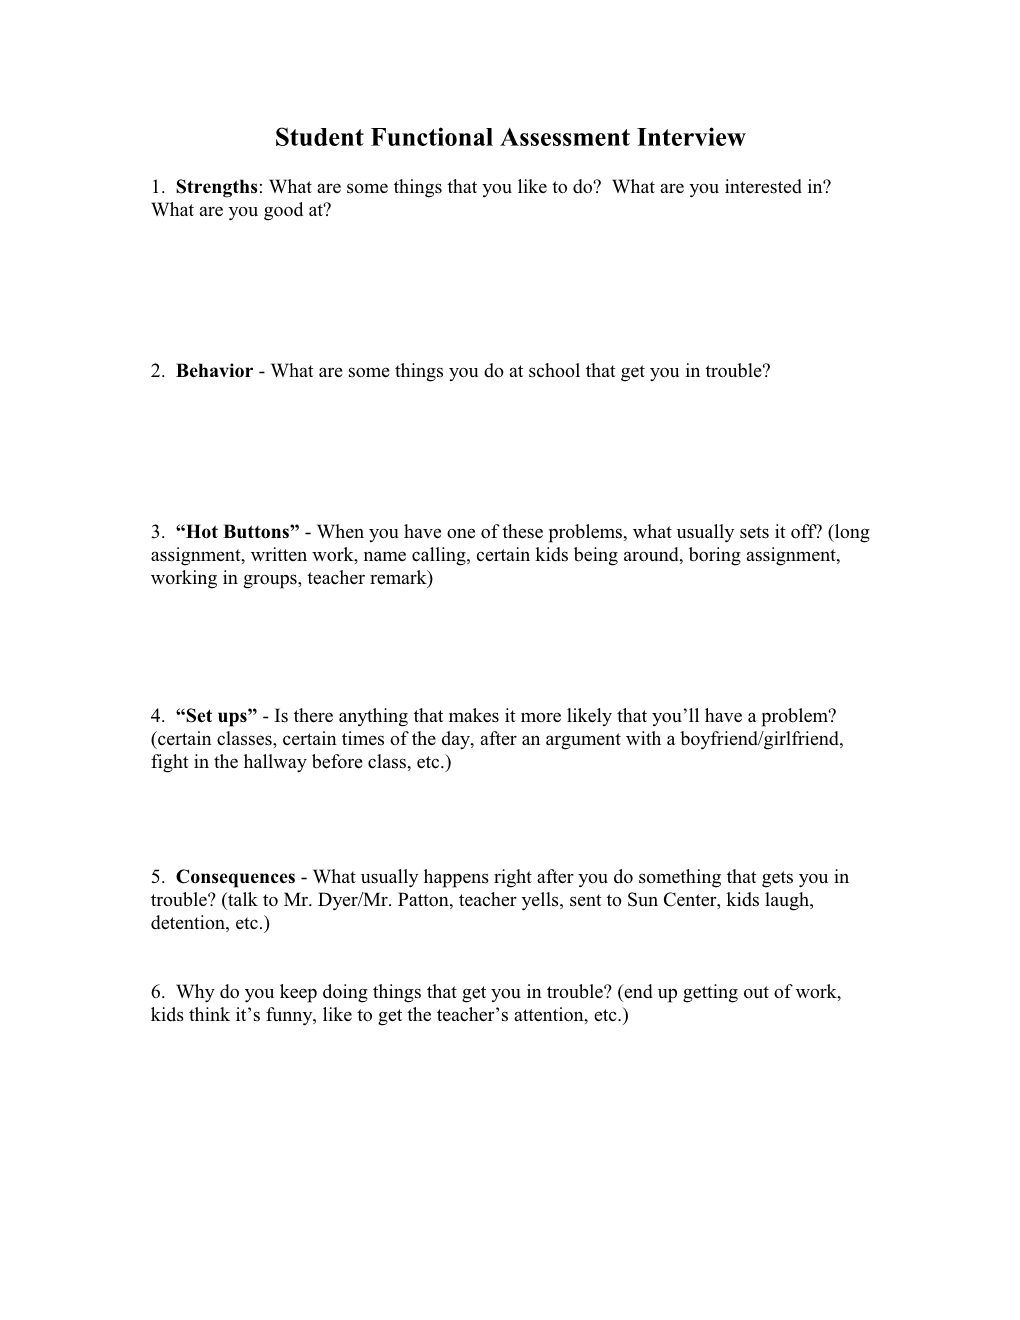 Brief Functional Assessment Interview for Parents